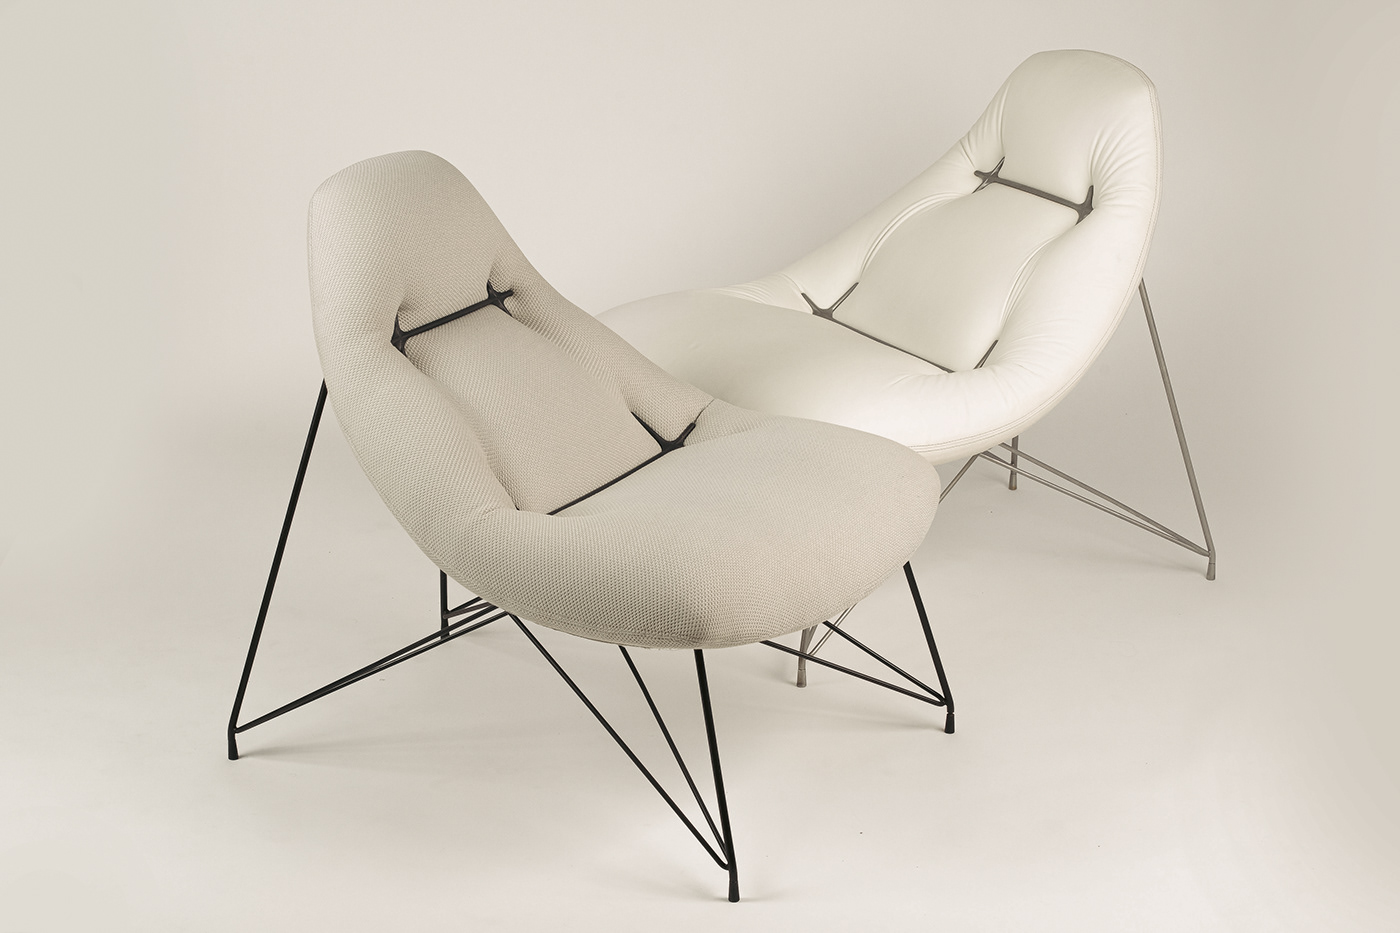 3d printed metal chair chair design furniture furniture design  Hungarian design product design  tufting upholstery